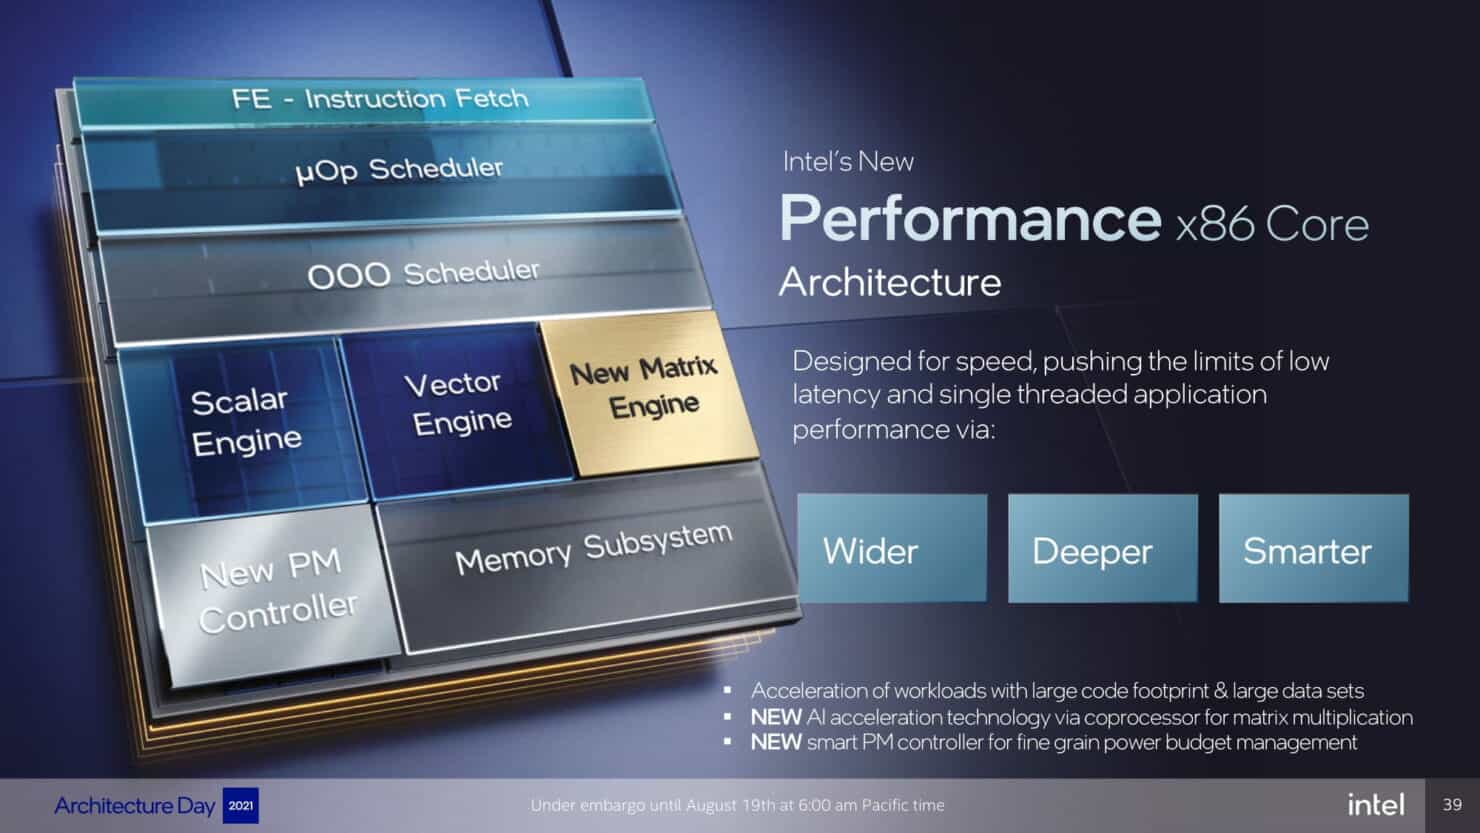 This image describes the key specifications of Intel's Performance Core architecture.  